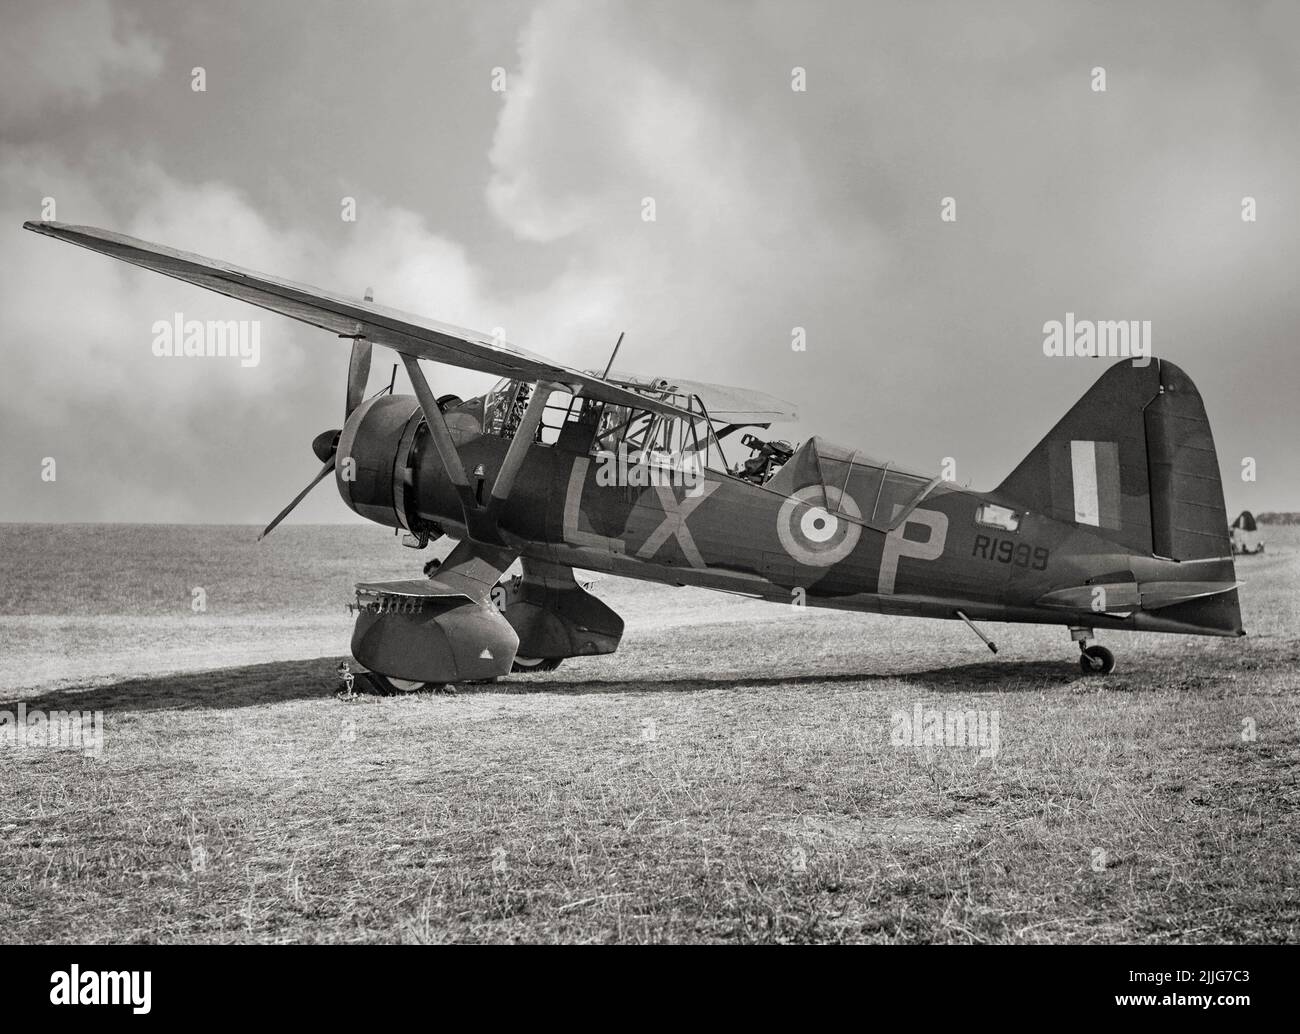 A Westland Lysander Mark II of No. 225 Squadron RAF, undergoing maintenance at Tilshead, Wiltshire. Note the single Lewis Mark III machine gun on its Fairey mounting in the rear cockpit. The aircraft was a British army co-operation and liaison aircraft used immediately before and during the Second World War. After becoming obsolete in the army co-operation role, the aircraft's short-field performance enabled clandestine missions using small, improvised airstrips behind enemy lines to place or recover agents, particularly in occupied France. Stock Photo